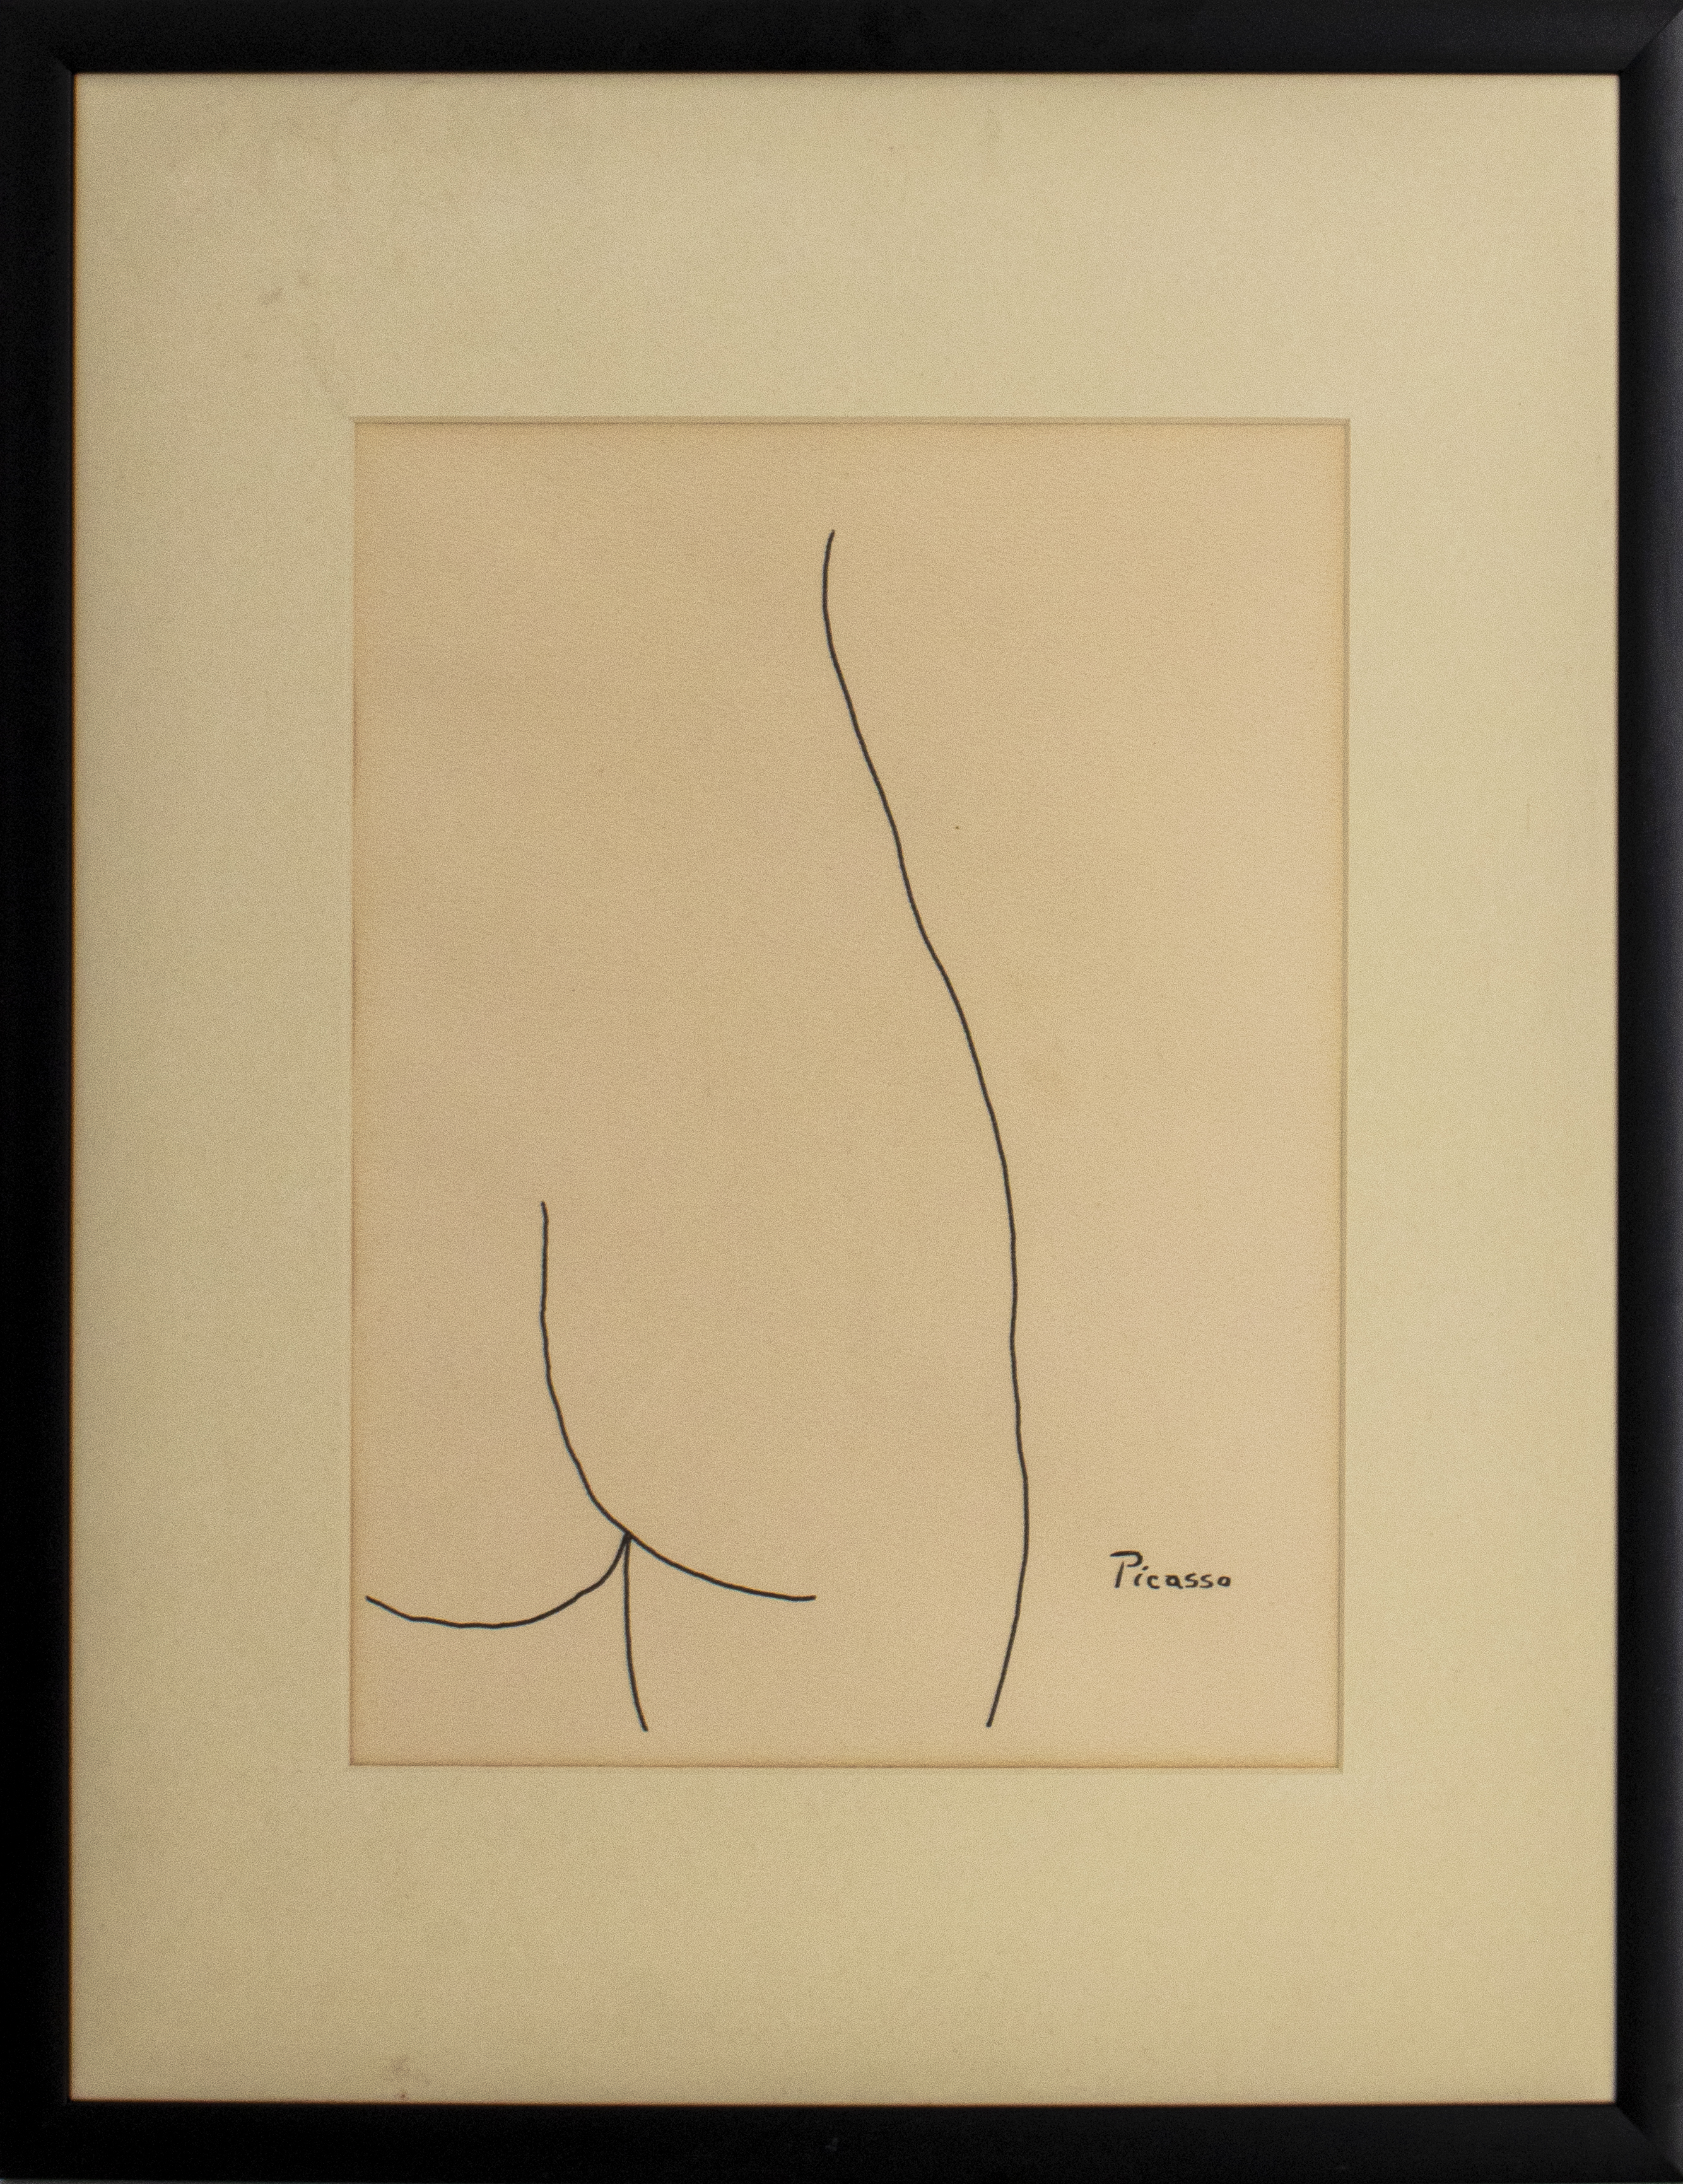 AFTER PICASSO PARTIAL FEMALE FIGURE 3c58a9